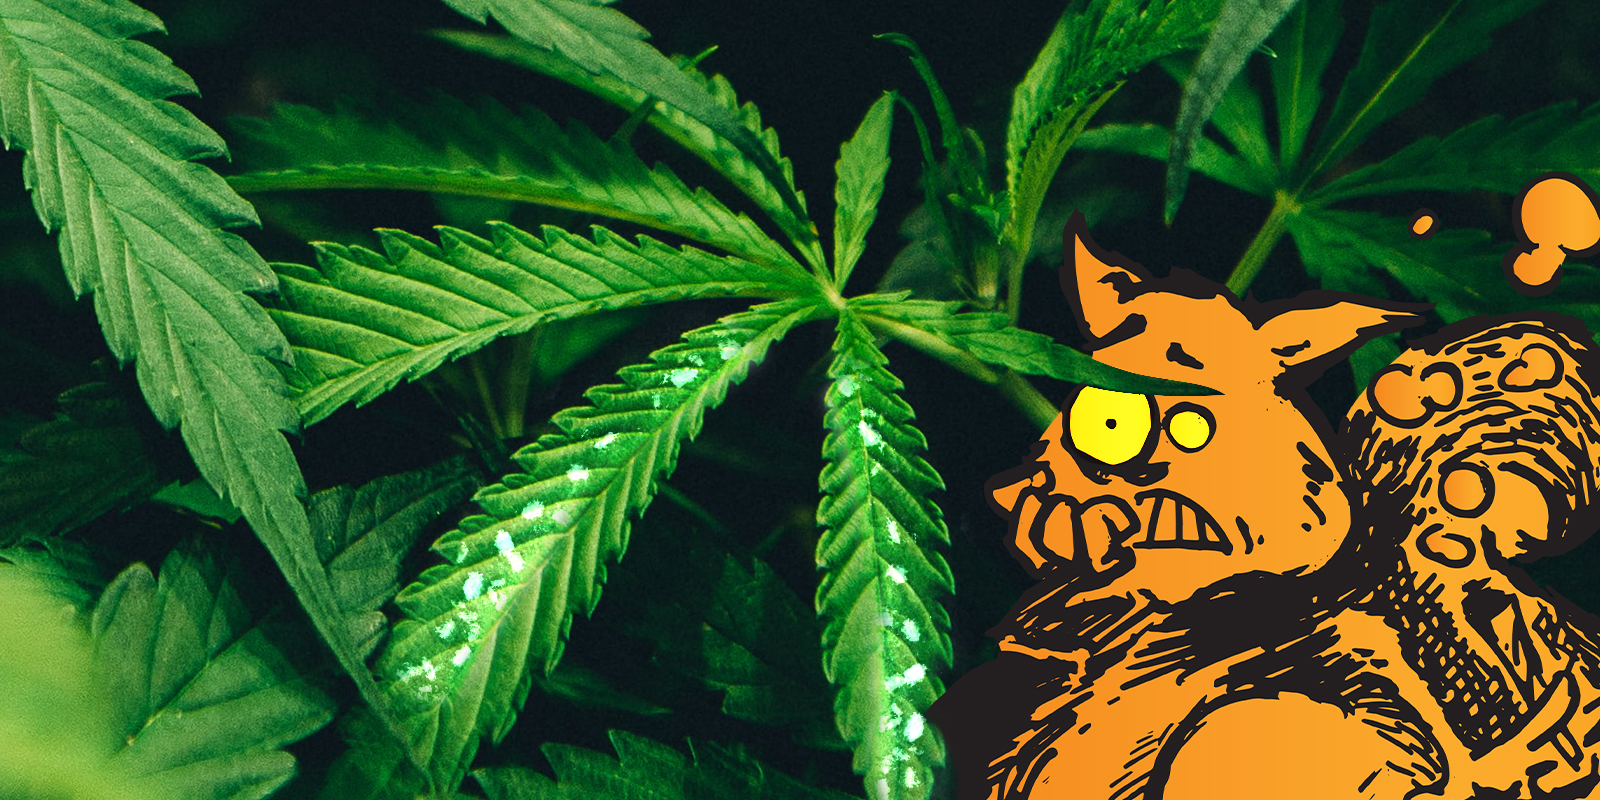 Pests in marijuana: how to detect them and fight them, Weedstockers